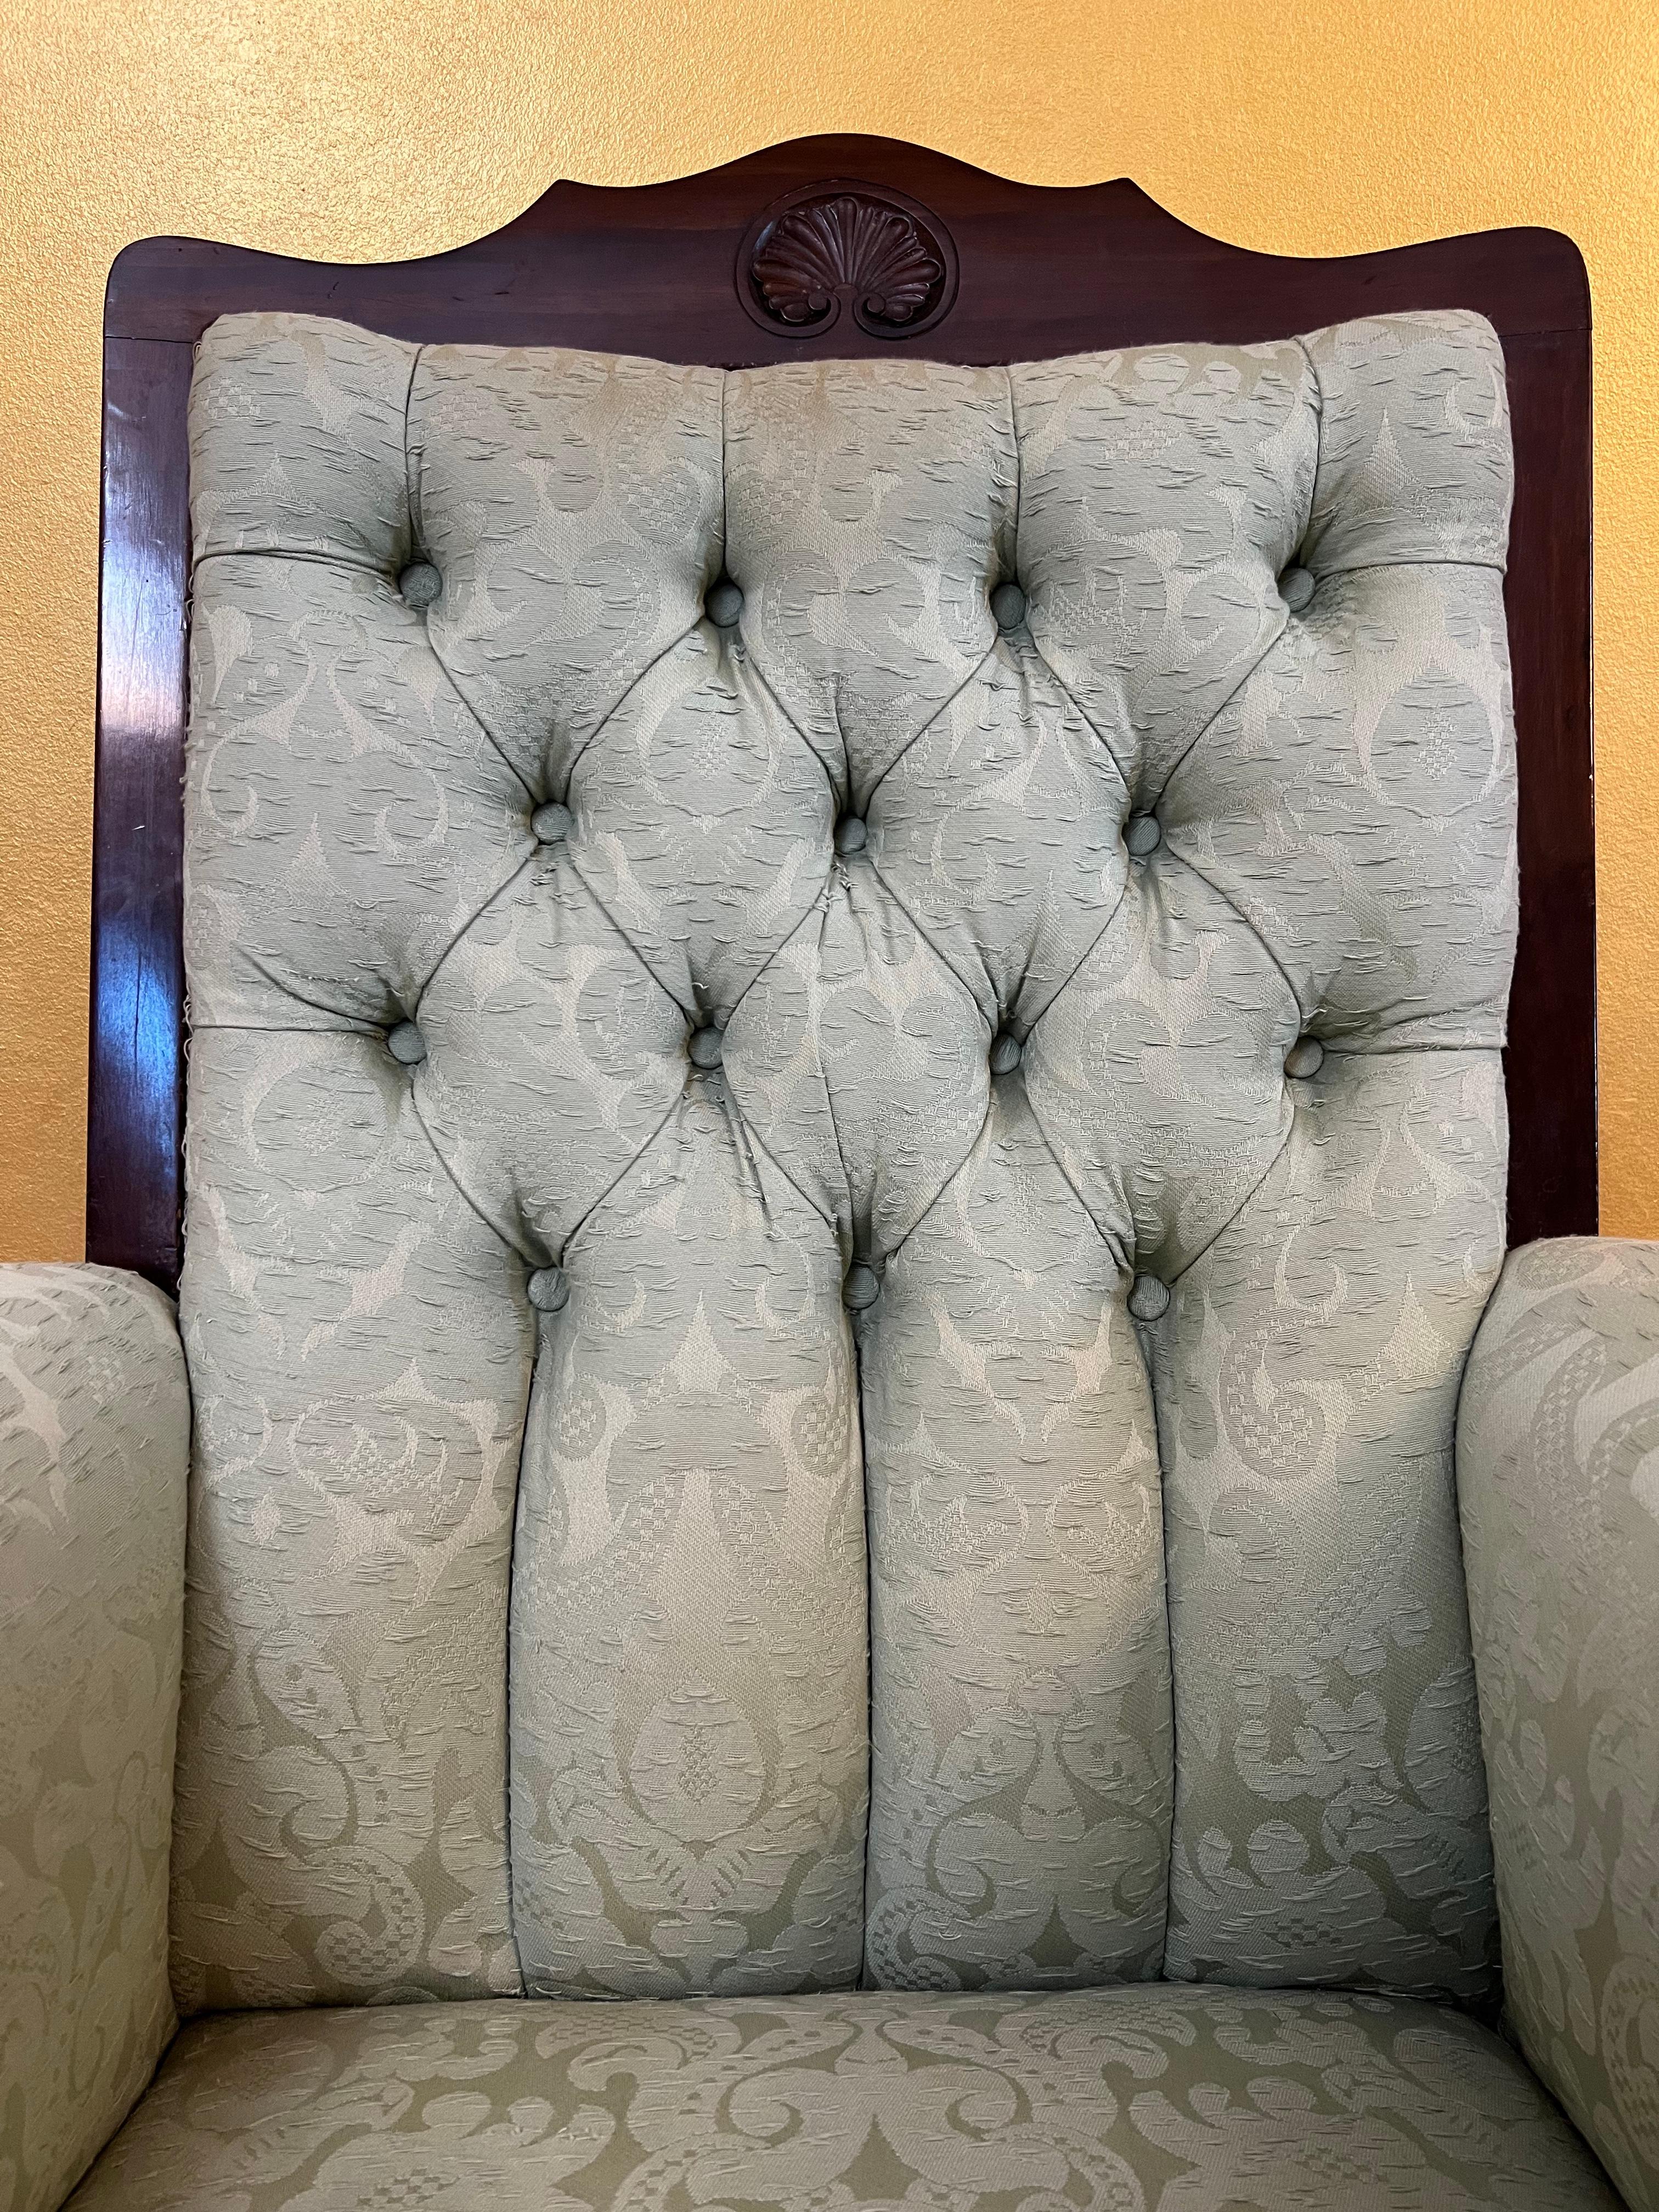 Button back mint colour damask fabric armchair, wooden detail around the front and back, has 4 castors, great for the living room or bedroom.

Circa: 1900

Material: Walnut

Country Of Origin: England

Measurements: 130cm high, 73cm length, 65cm